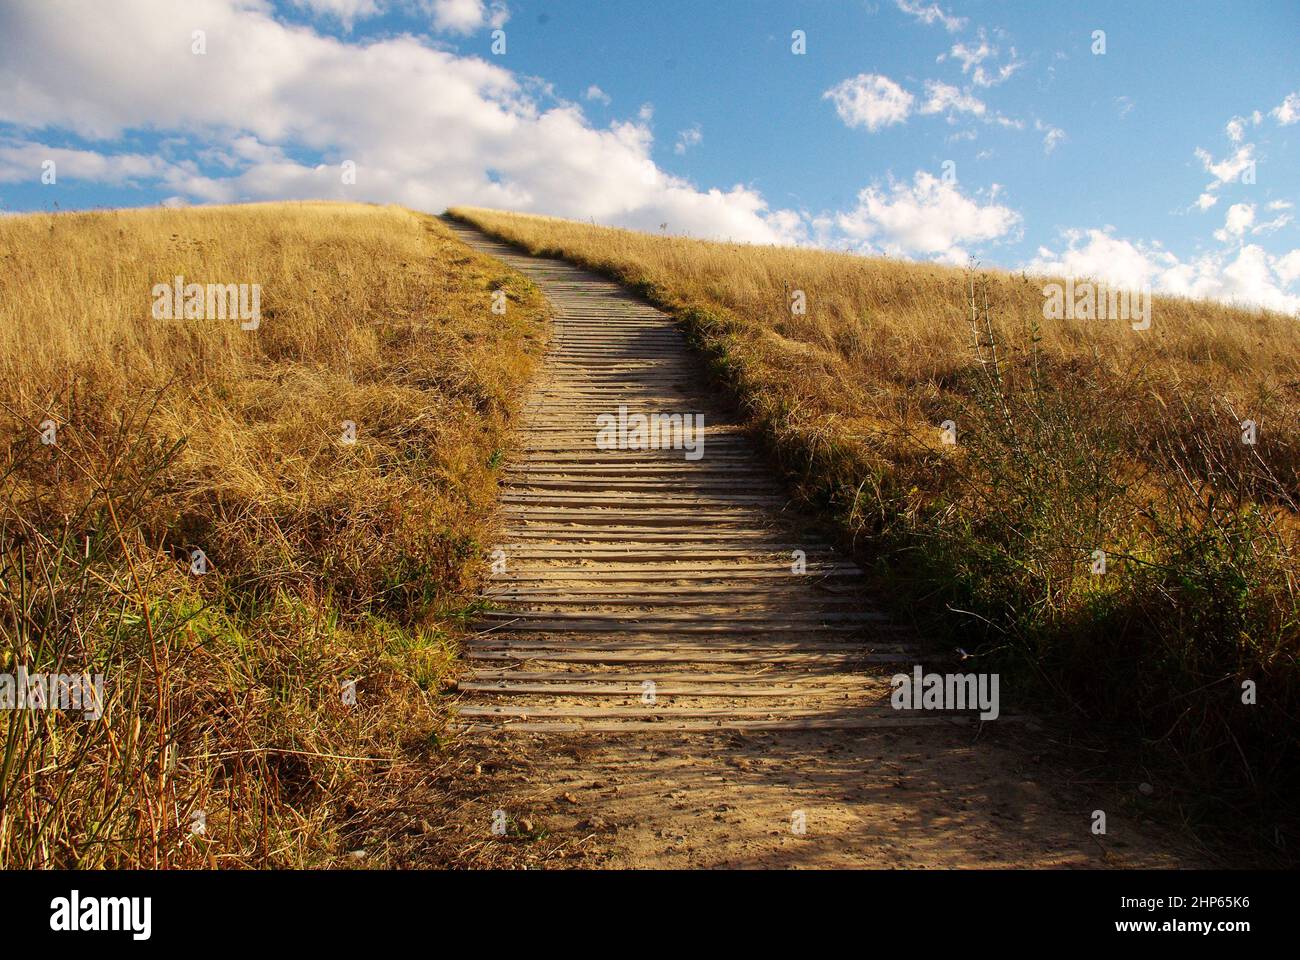 Scenic shot of a trail up a hill of withering grass field with wooden planks for foothold Stock Photo